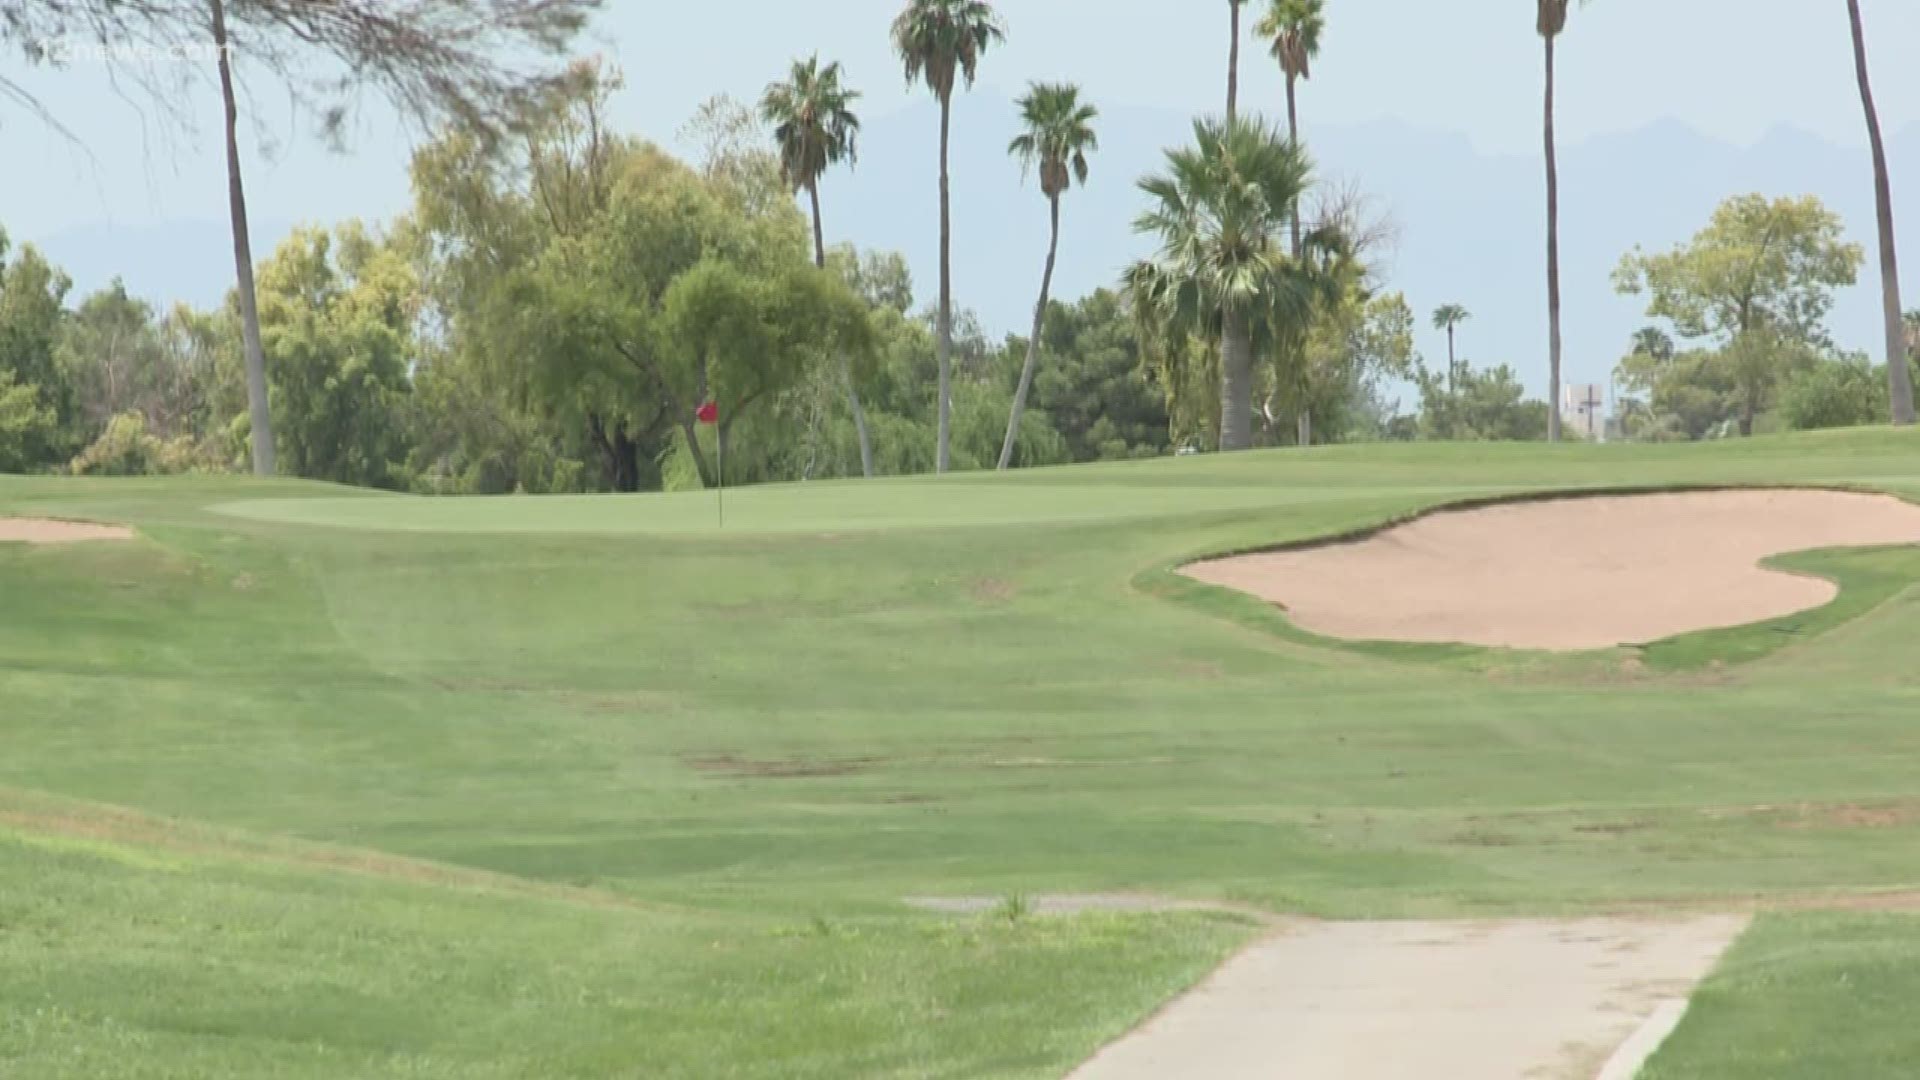 Killer bees attacked two men on a North Phoenix golf course Wednesday morning. We talk to experts on what to if you encounter killer bees while out and about.